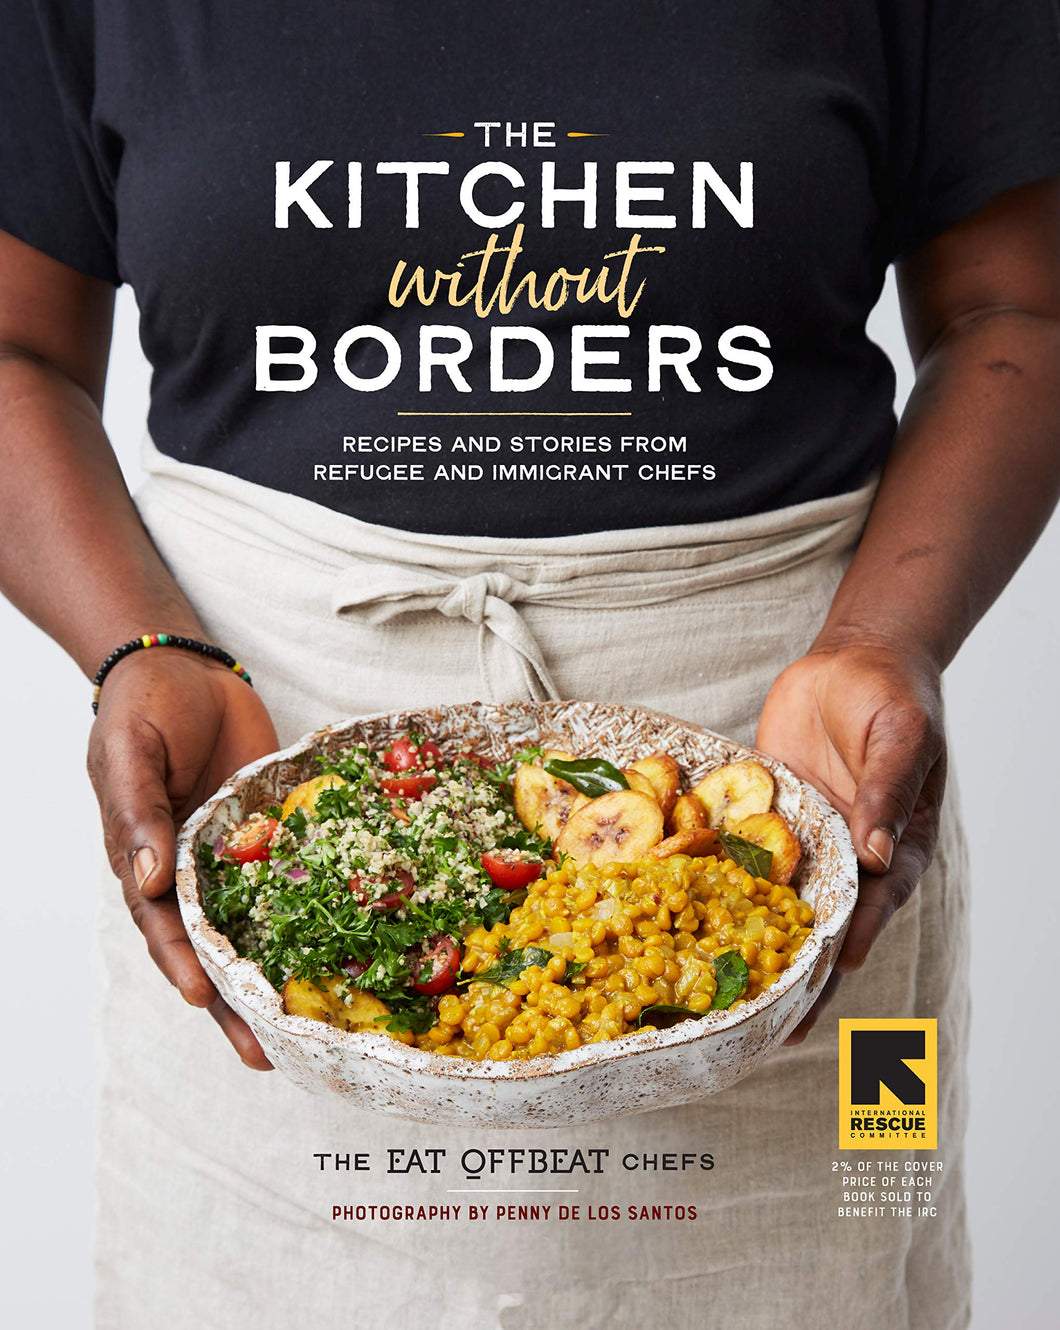 The Kitchen without Borders: Recipes and Stories from Refugee and Immigrant Chefs